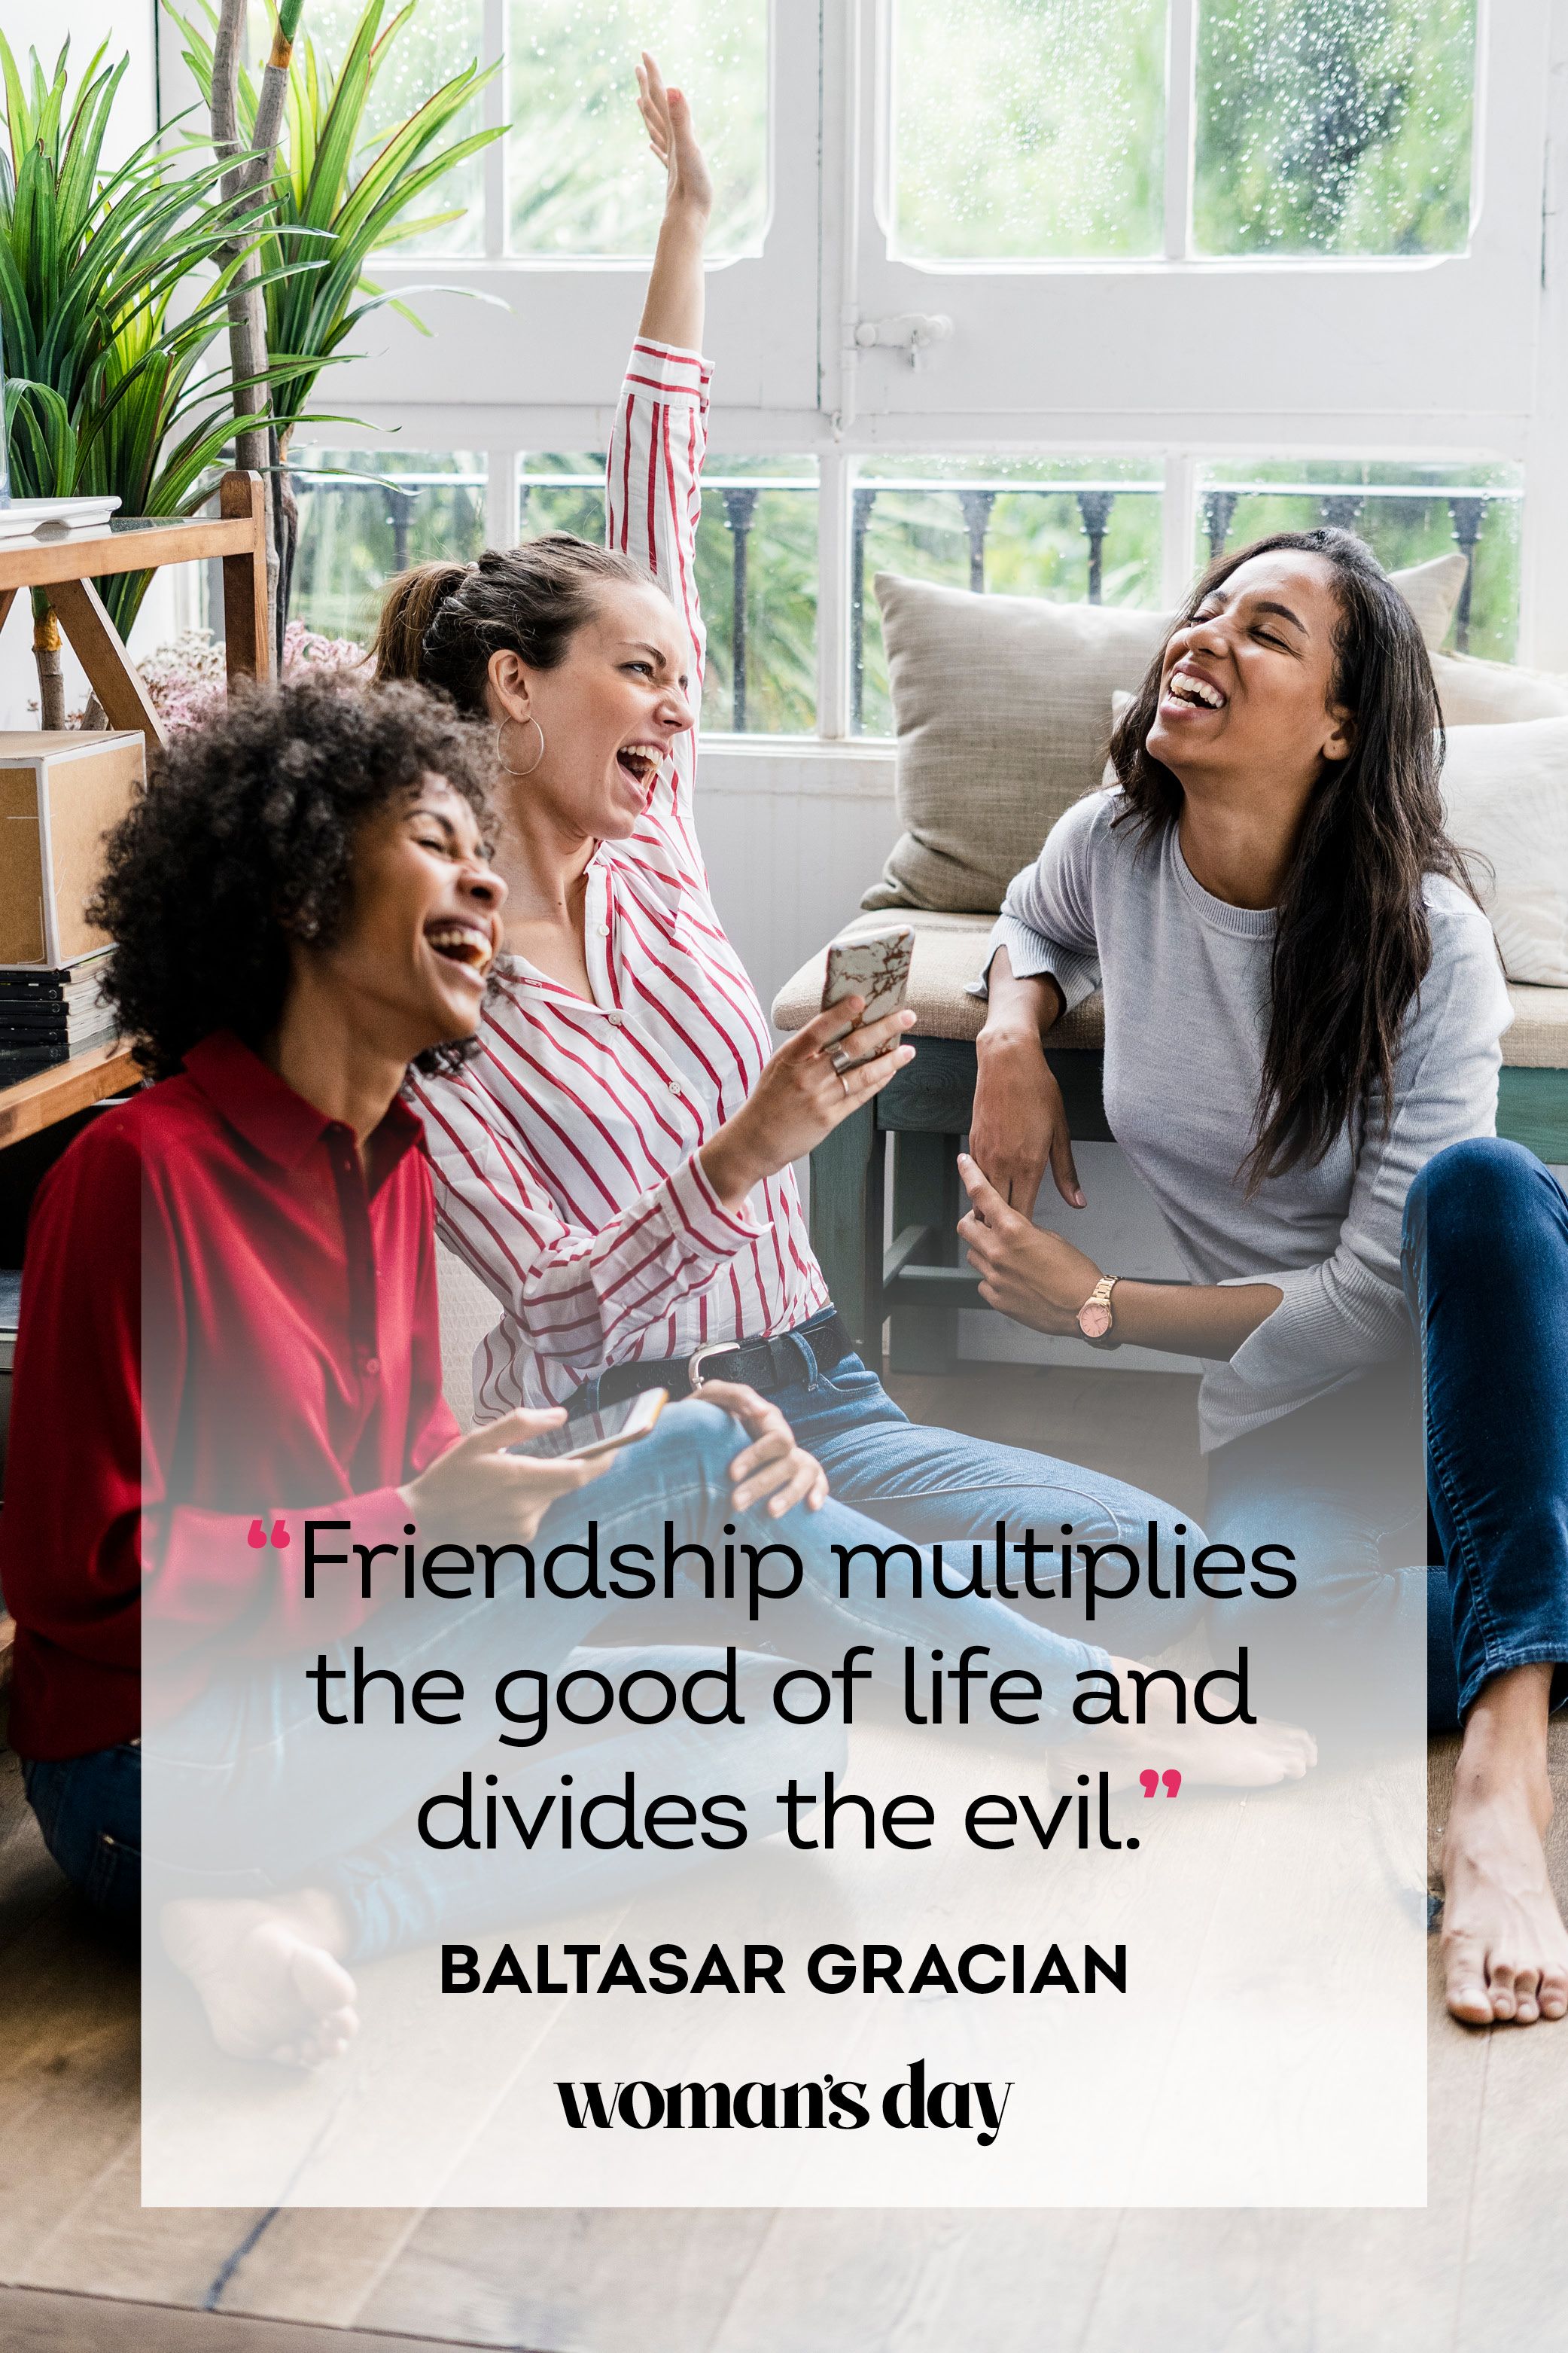 good quotes about friendship and life